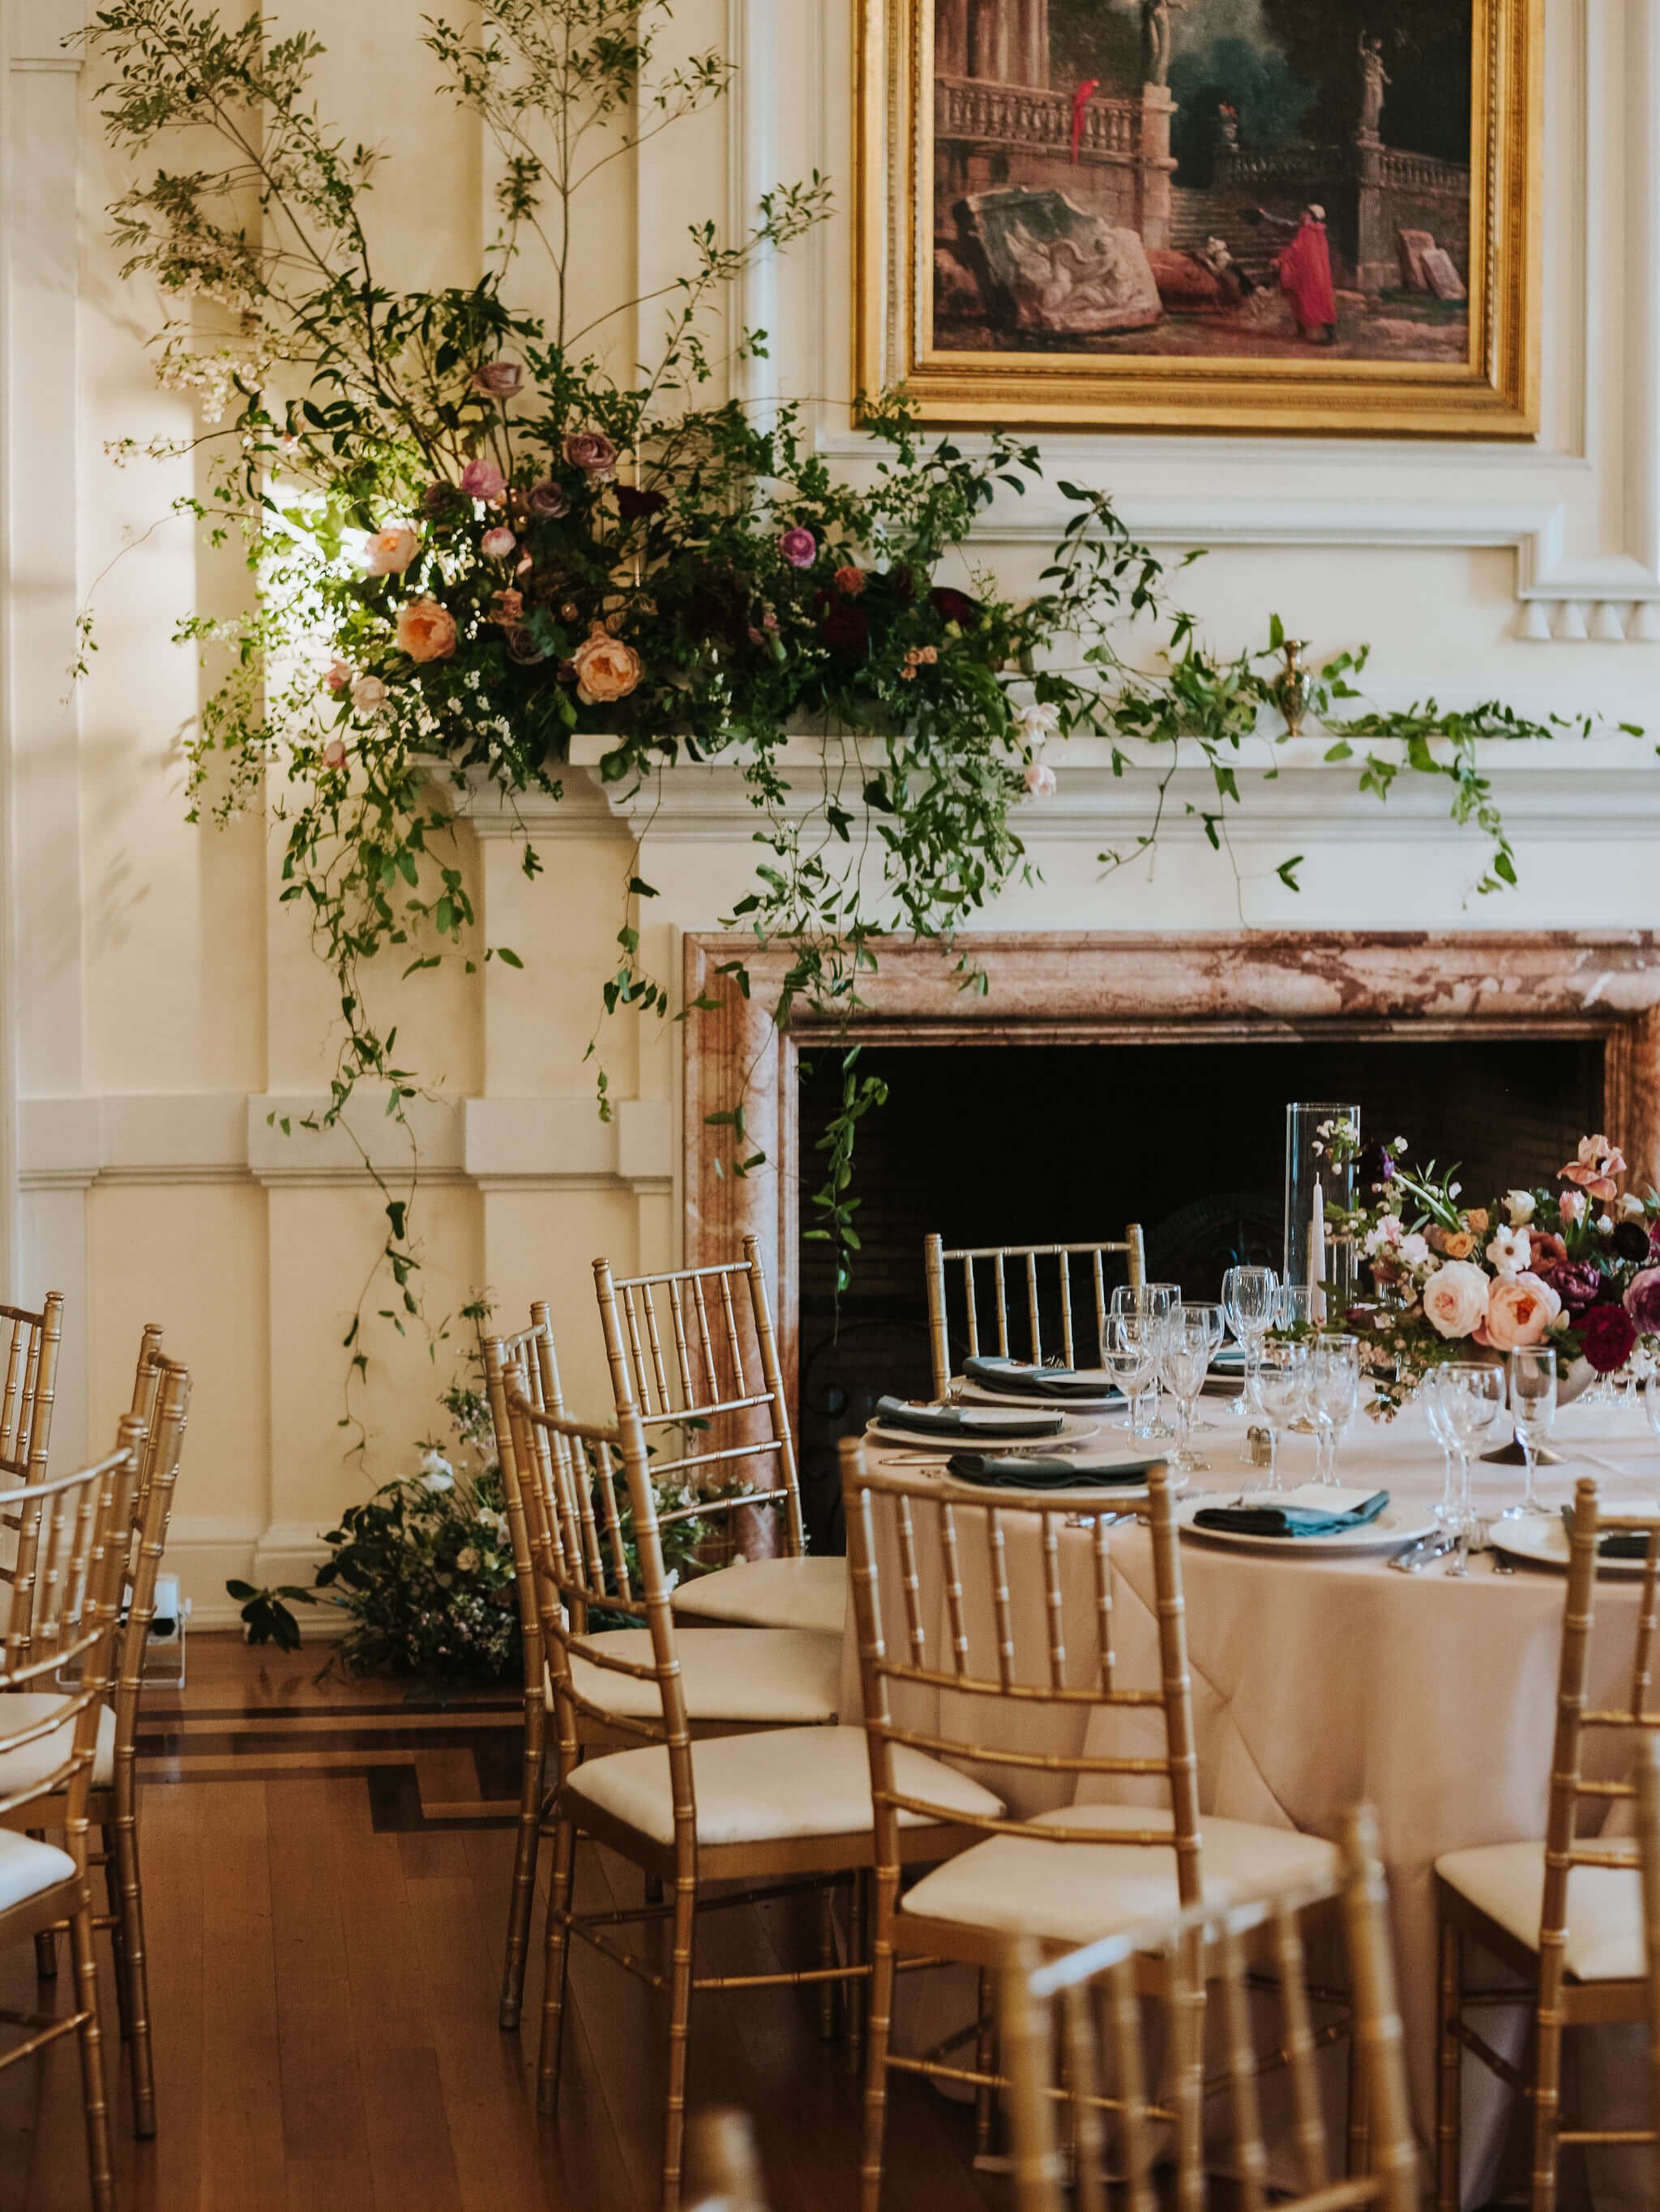 Charming wedding ceremony setup with floral-adorned chairs and an ornate fireplace, inviting an intimate and stylish ambiance.